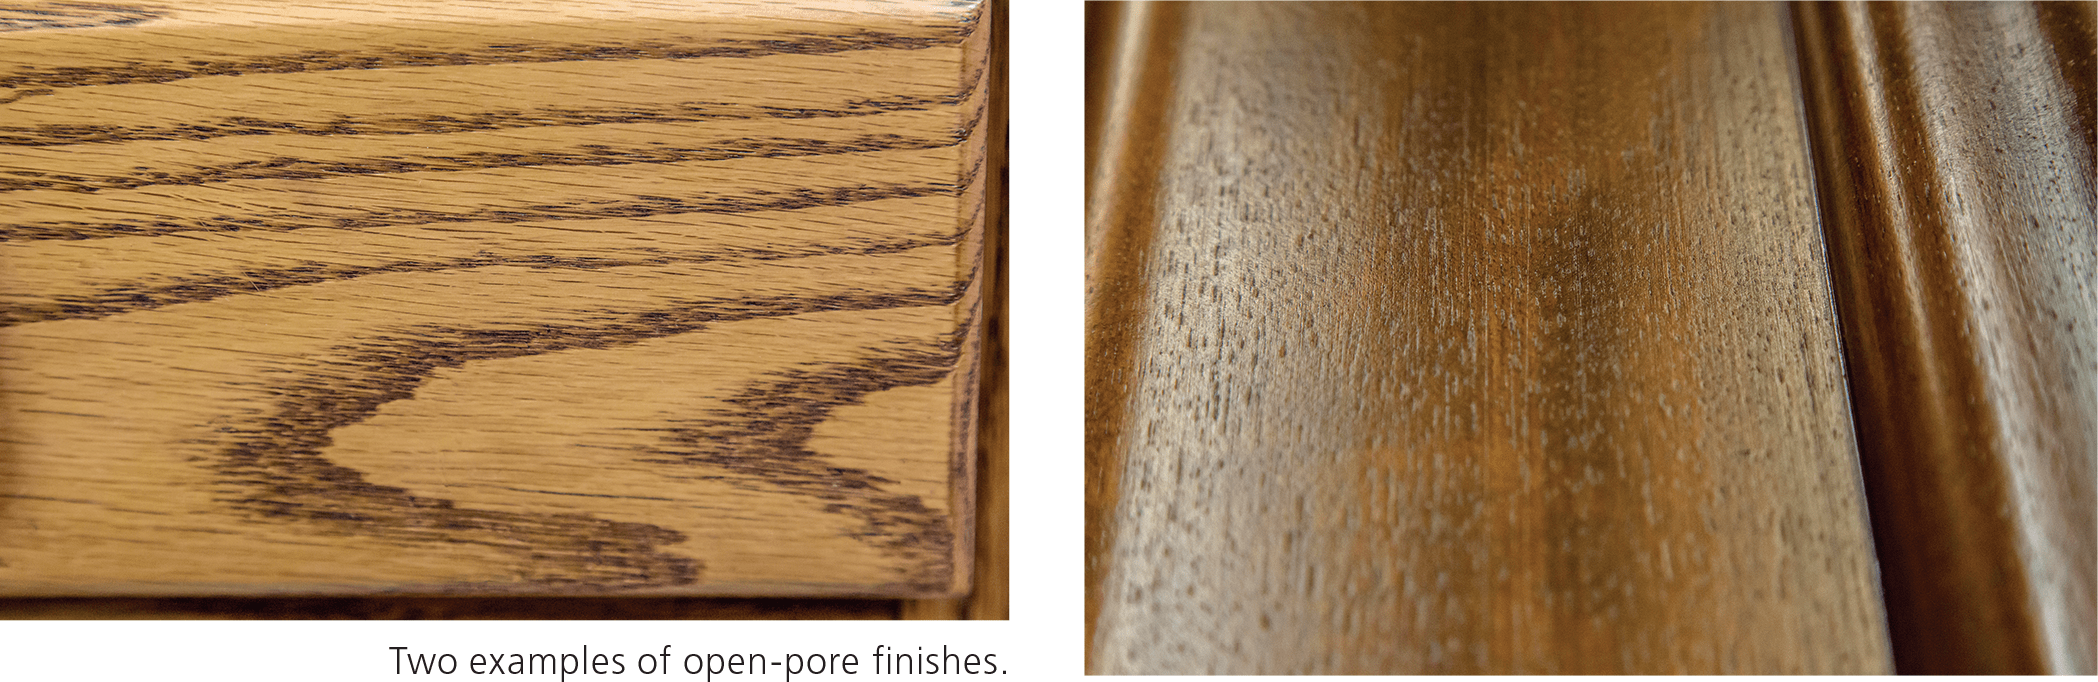 Two examples of open-pore finishes